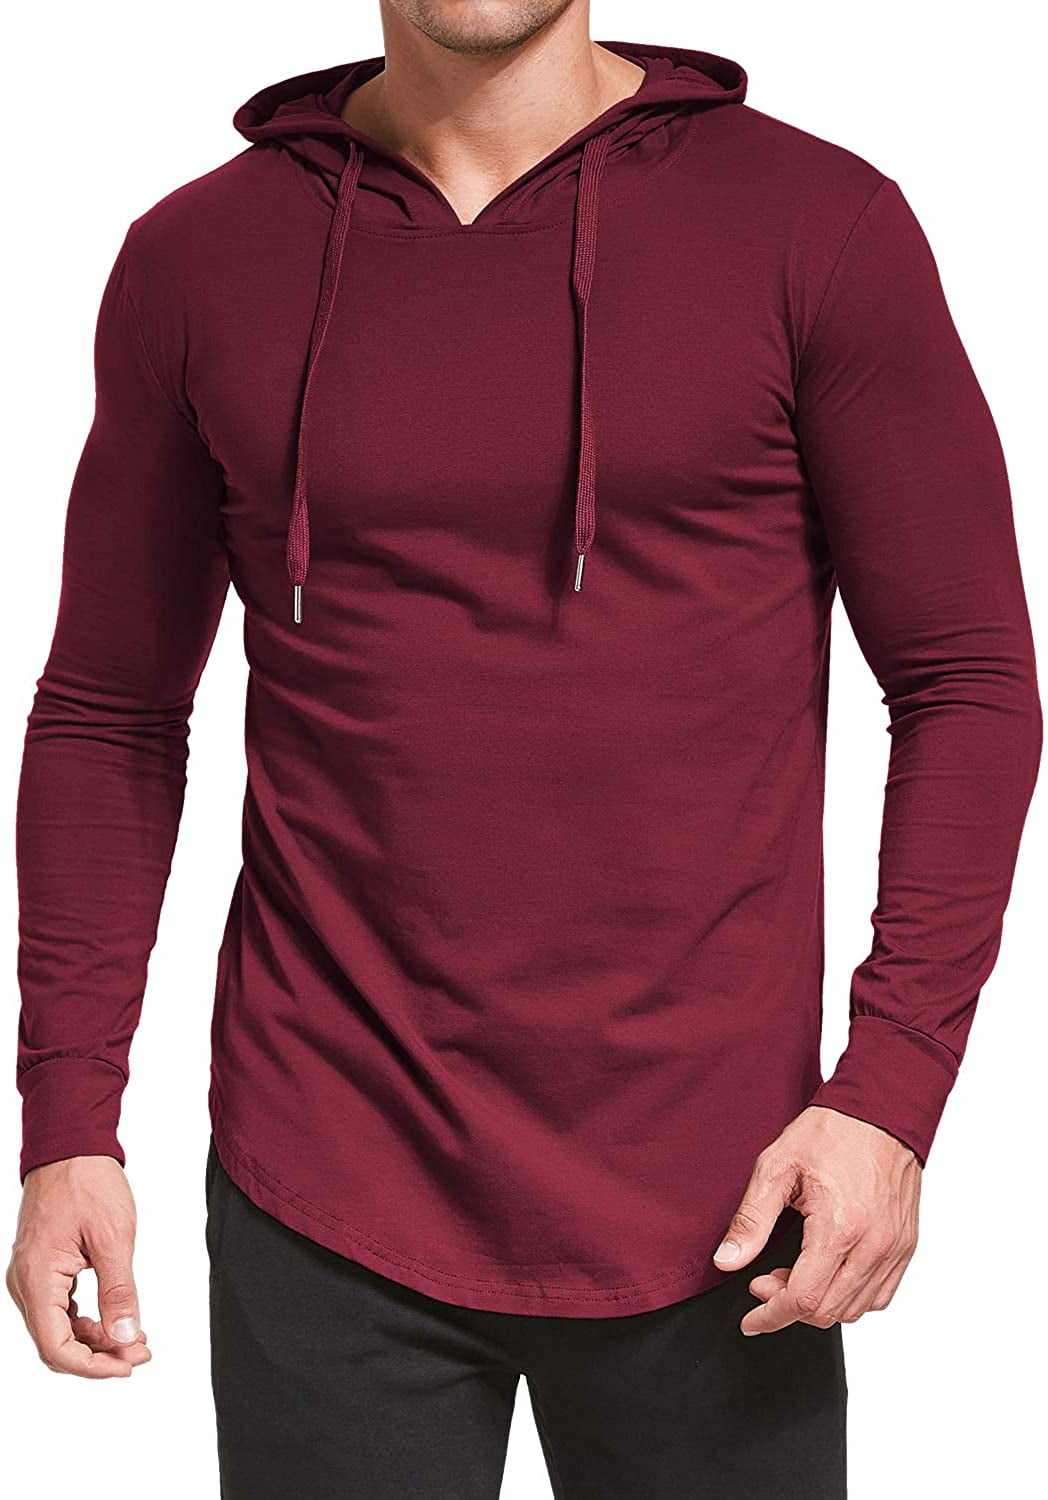 COOFANDY Men's Fashion Athletic Hoodies Pullover Muscle Fit Workout Gym Sweatshirt Cotton Short Sleeve Hooded T-Shirts 